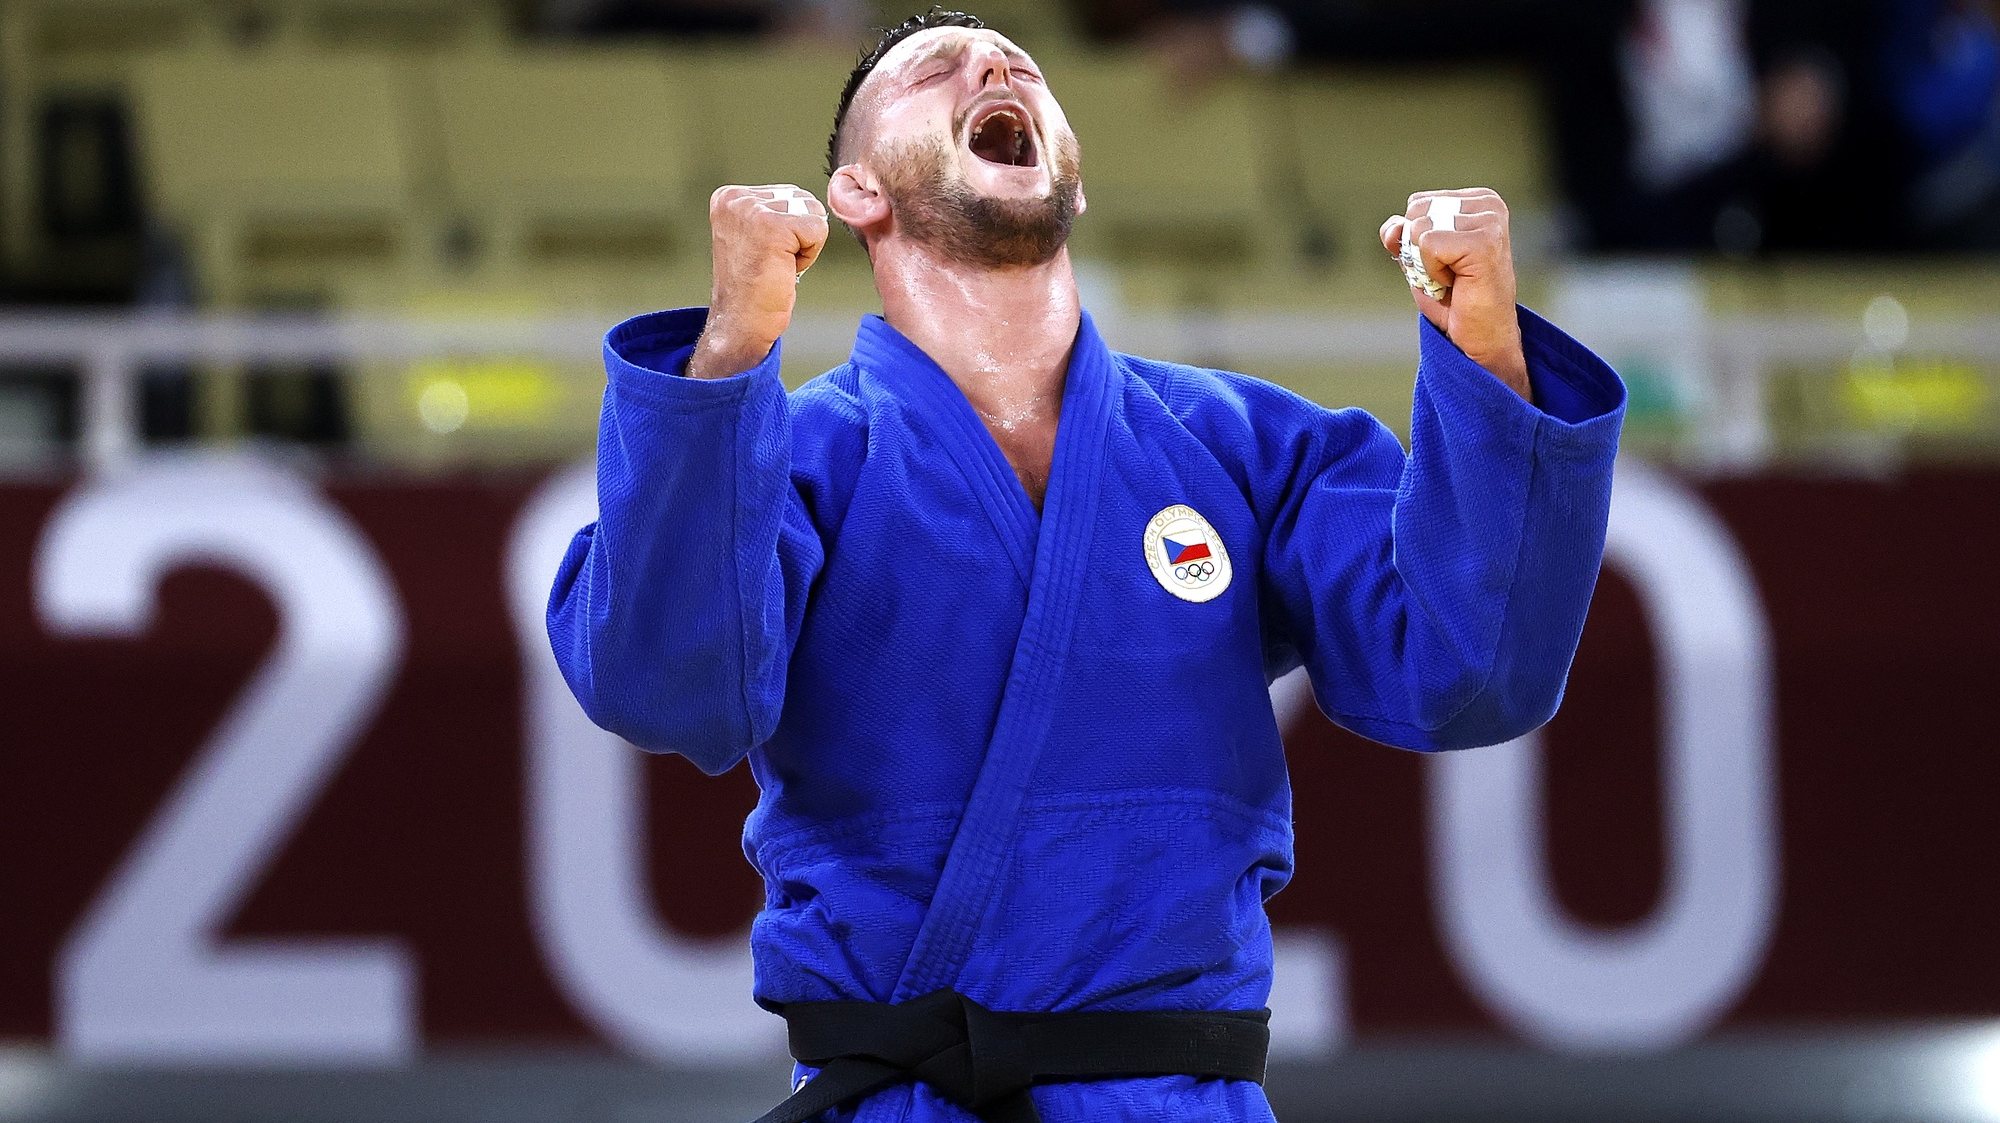 epa09379312 Luka Krpalek of Czech Republic reacts after defeating Hisayoshi Harasawa of Japan during the Men +100 kg Semifinal Table B contest at the Judo events of the Tokyo 2020 Olympic Games at the Nippon Budokan arena in Tokyo, Japan, 30 July 2021  EPA/RITCHIE B. TONGO